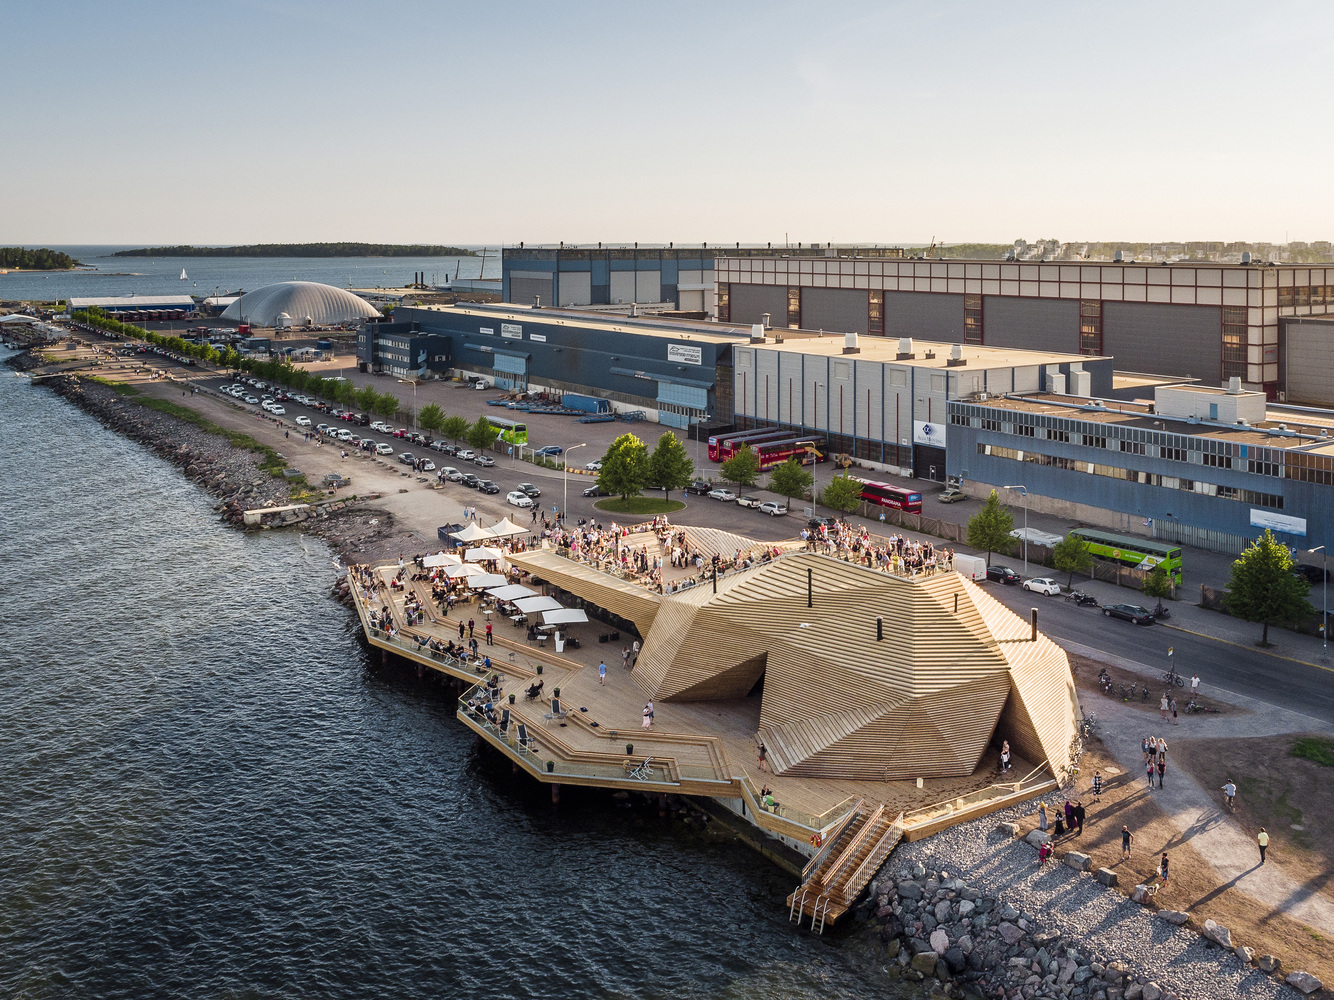 Sauna Reinvented: Helsinki’s hip, high-design public sauna complex, Löyly, shows the intensely new social directions in sauna-going (Source: Avanto Architects by kuvio.com)